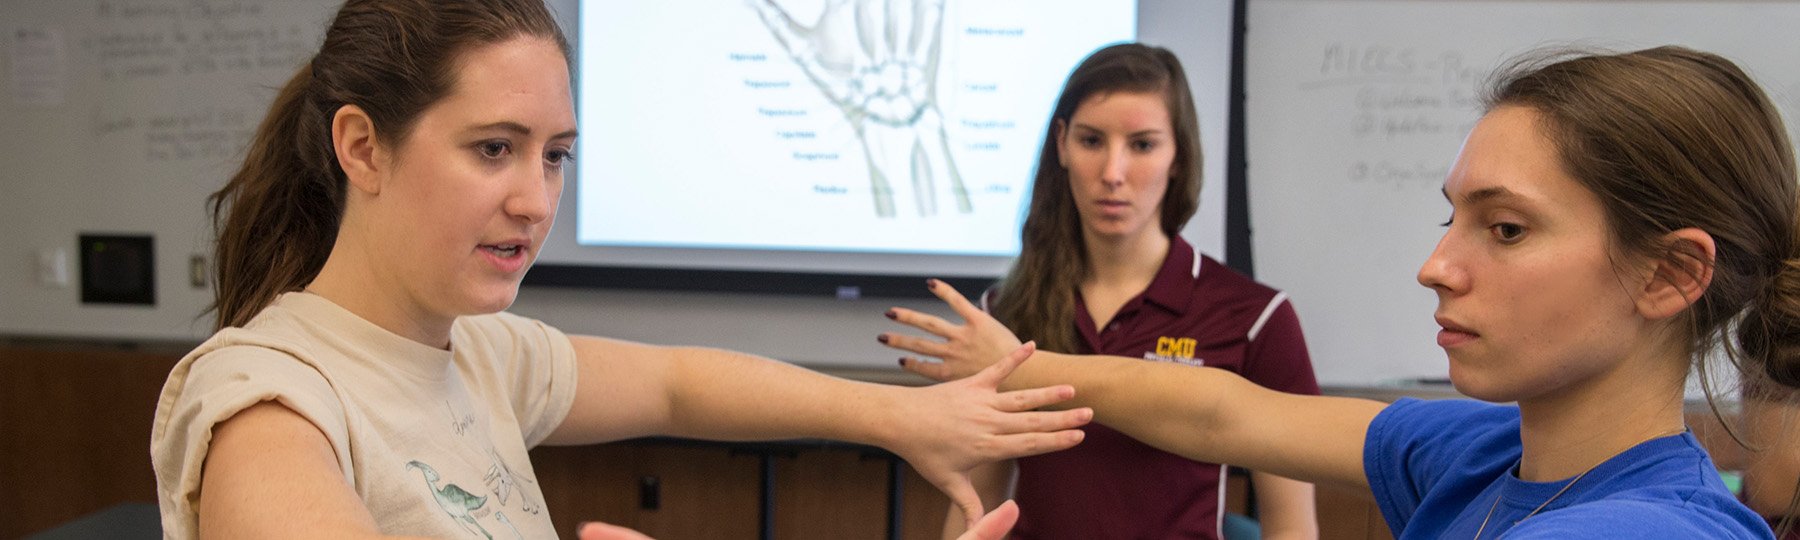 physical therapy students using techniques